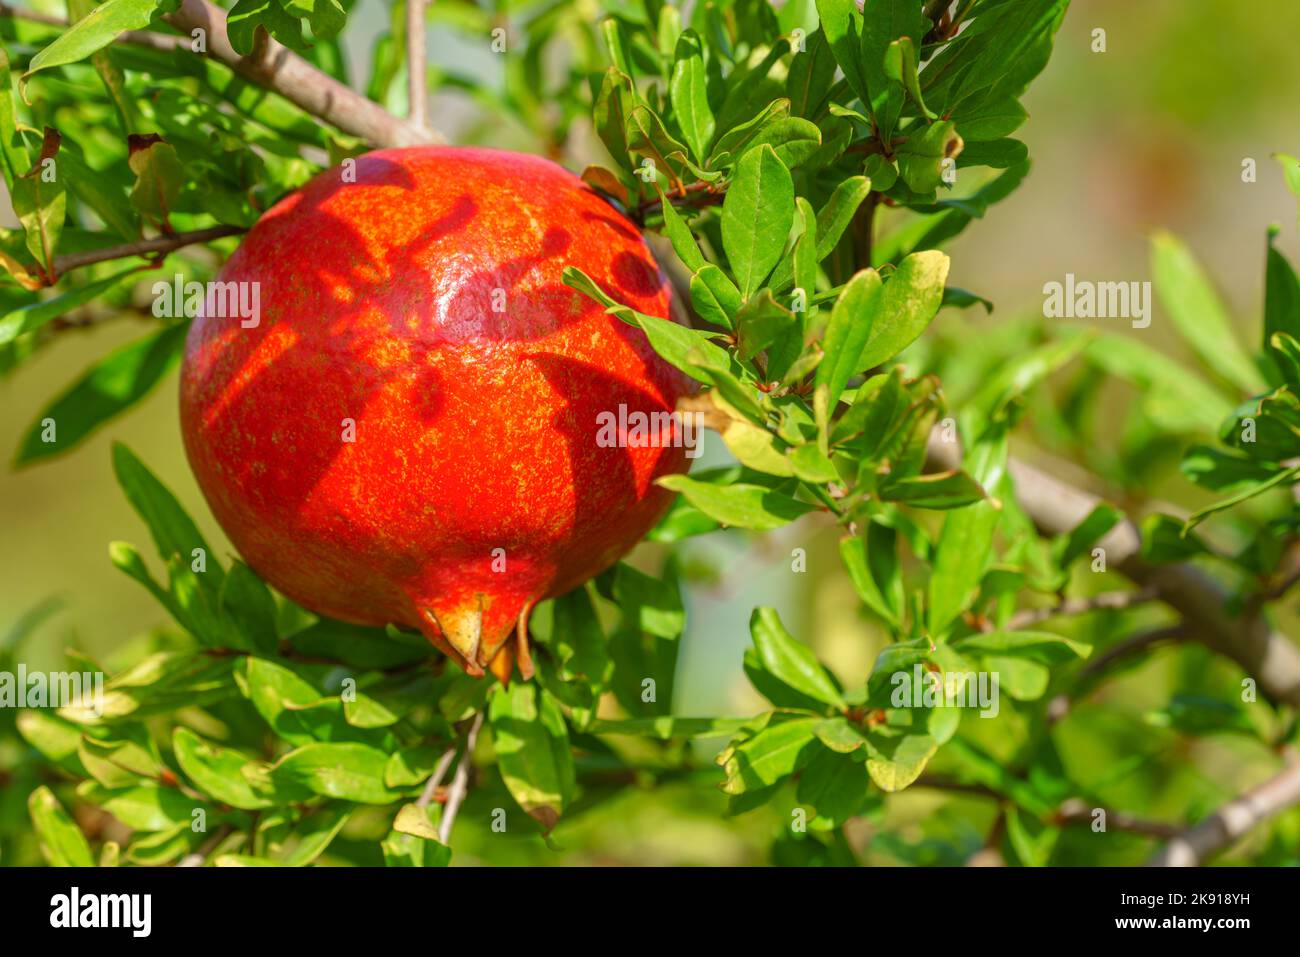 Beautiful red fresh pomegranate hanging from a branch against a green background Stock Photo